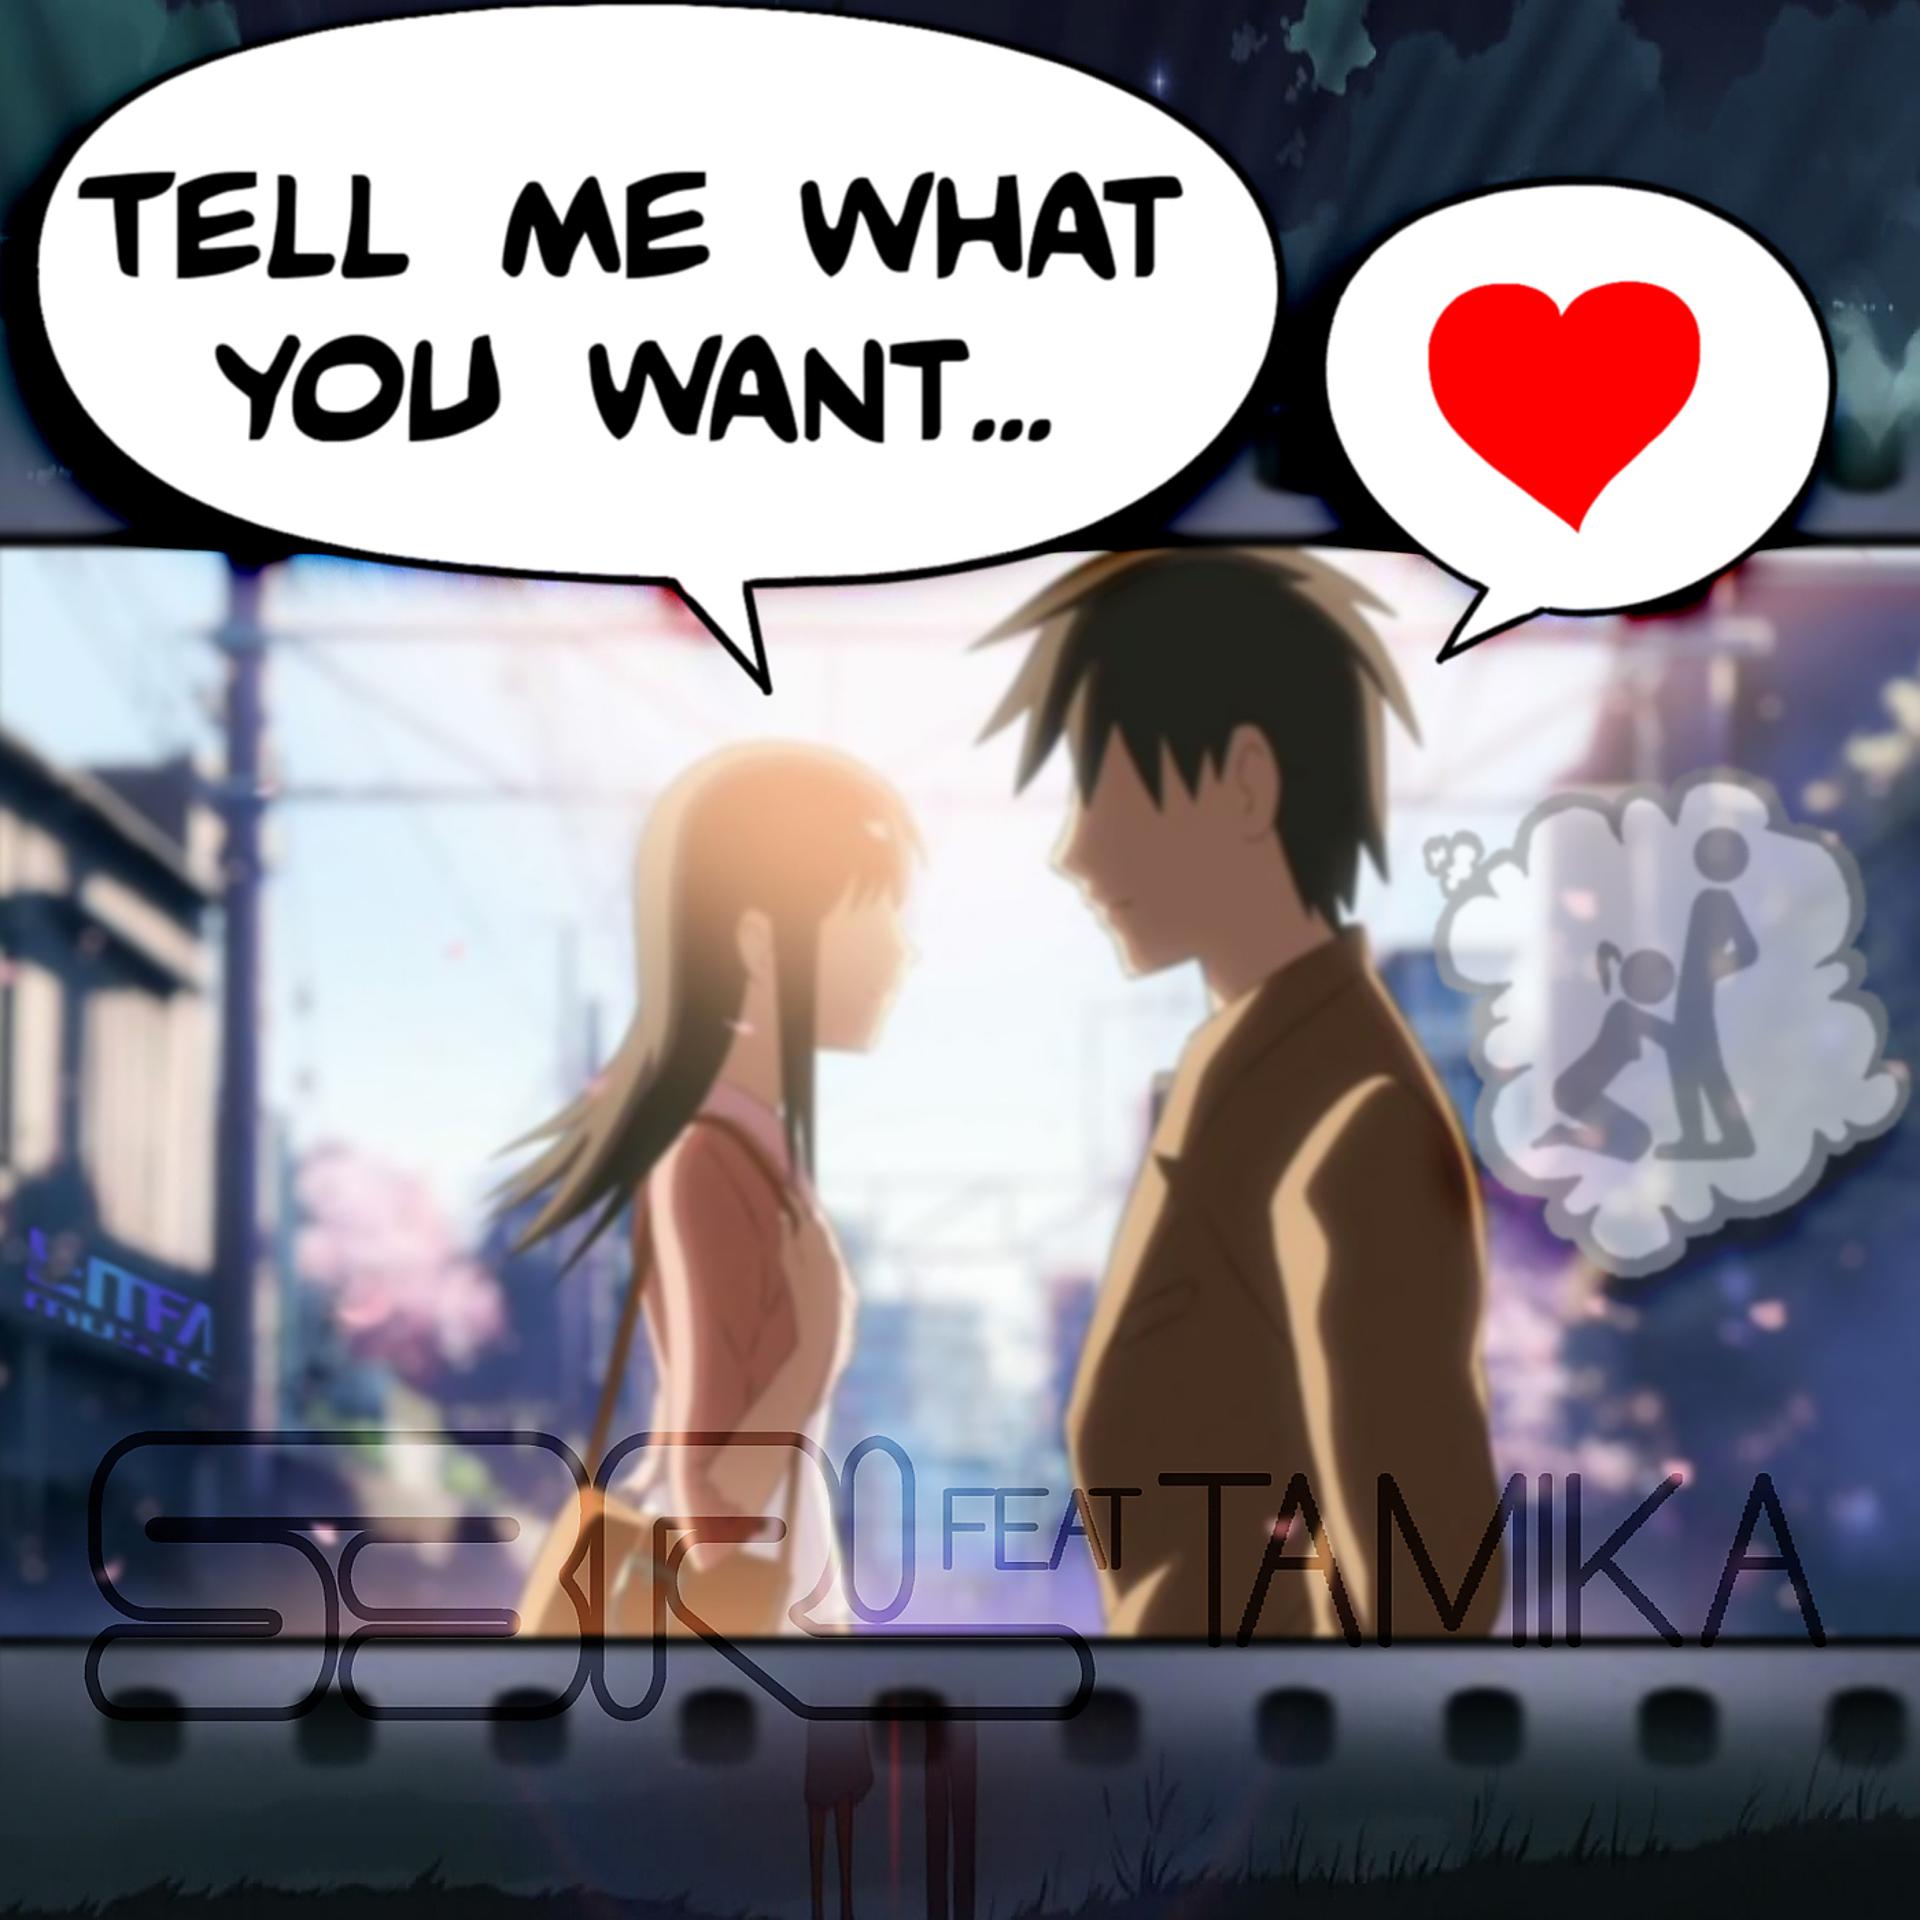 Tell me what?. Tell me what you want. Tamika s3rl. Фф tell me what you want.